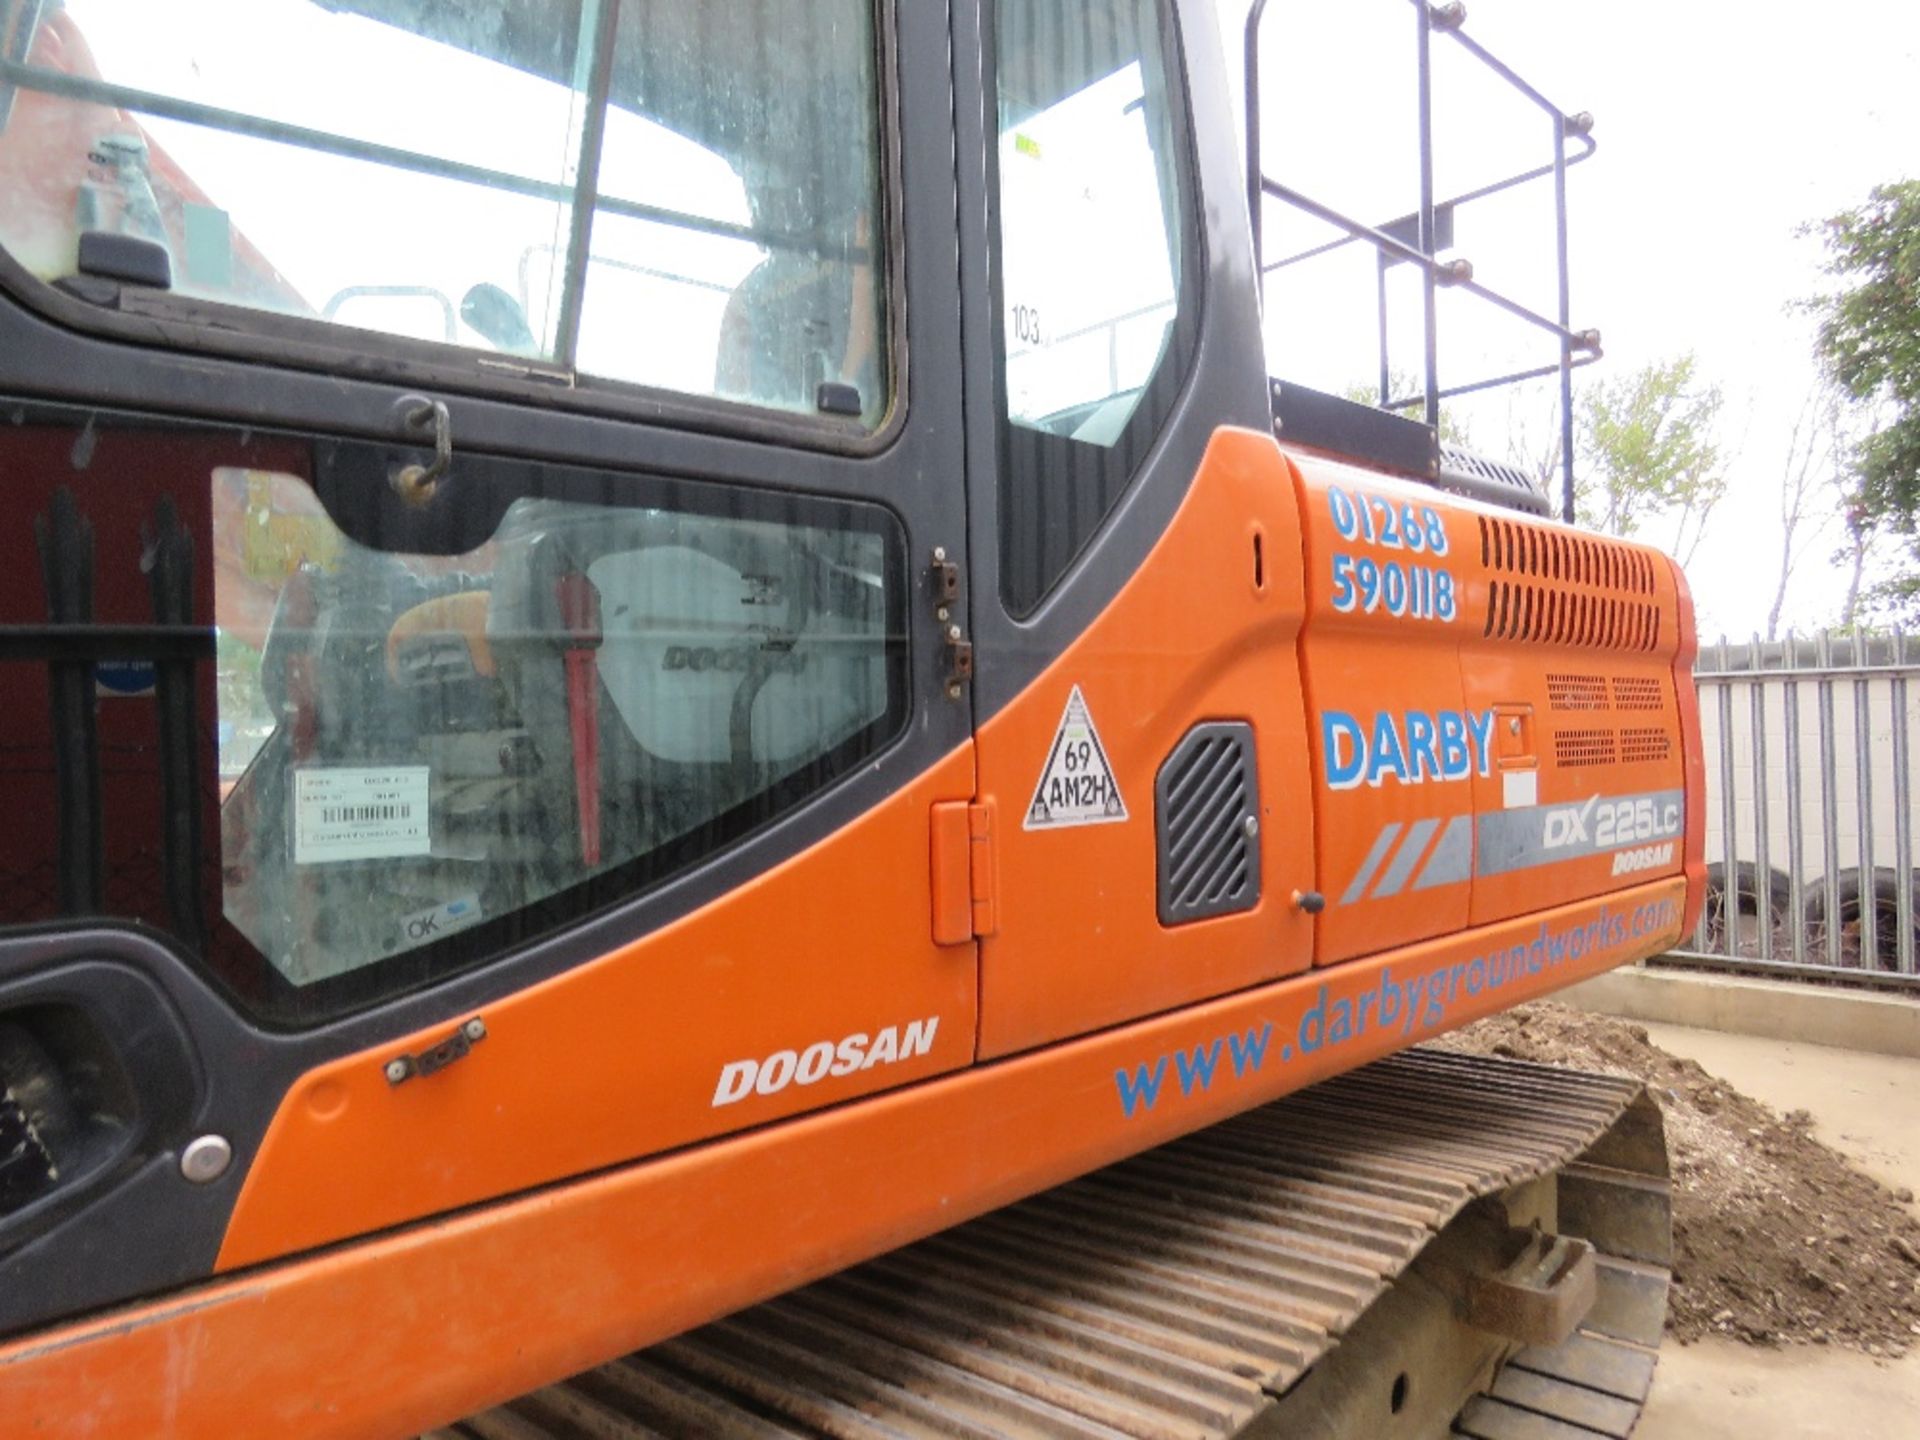 DOOSAN DX225LC-3 STEEL TRACKED EXCAVATOR 2016 BUILD. Non adblue!! only 10% plus vat BP on this lot - Image 7 of 16